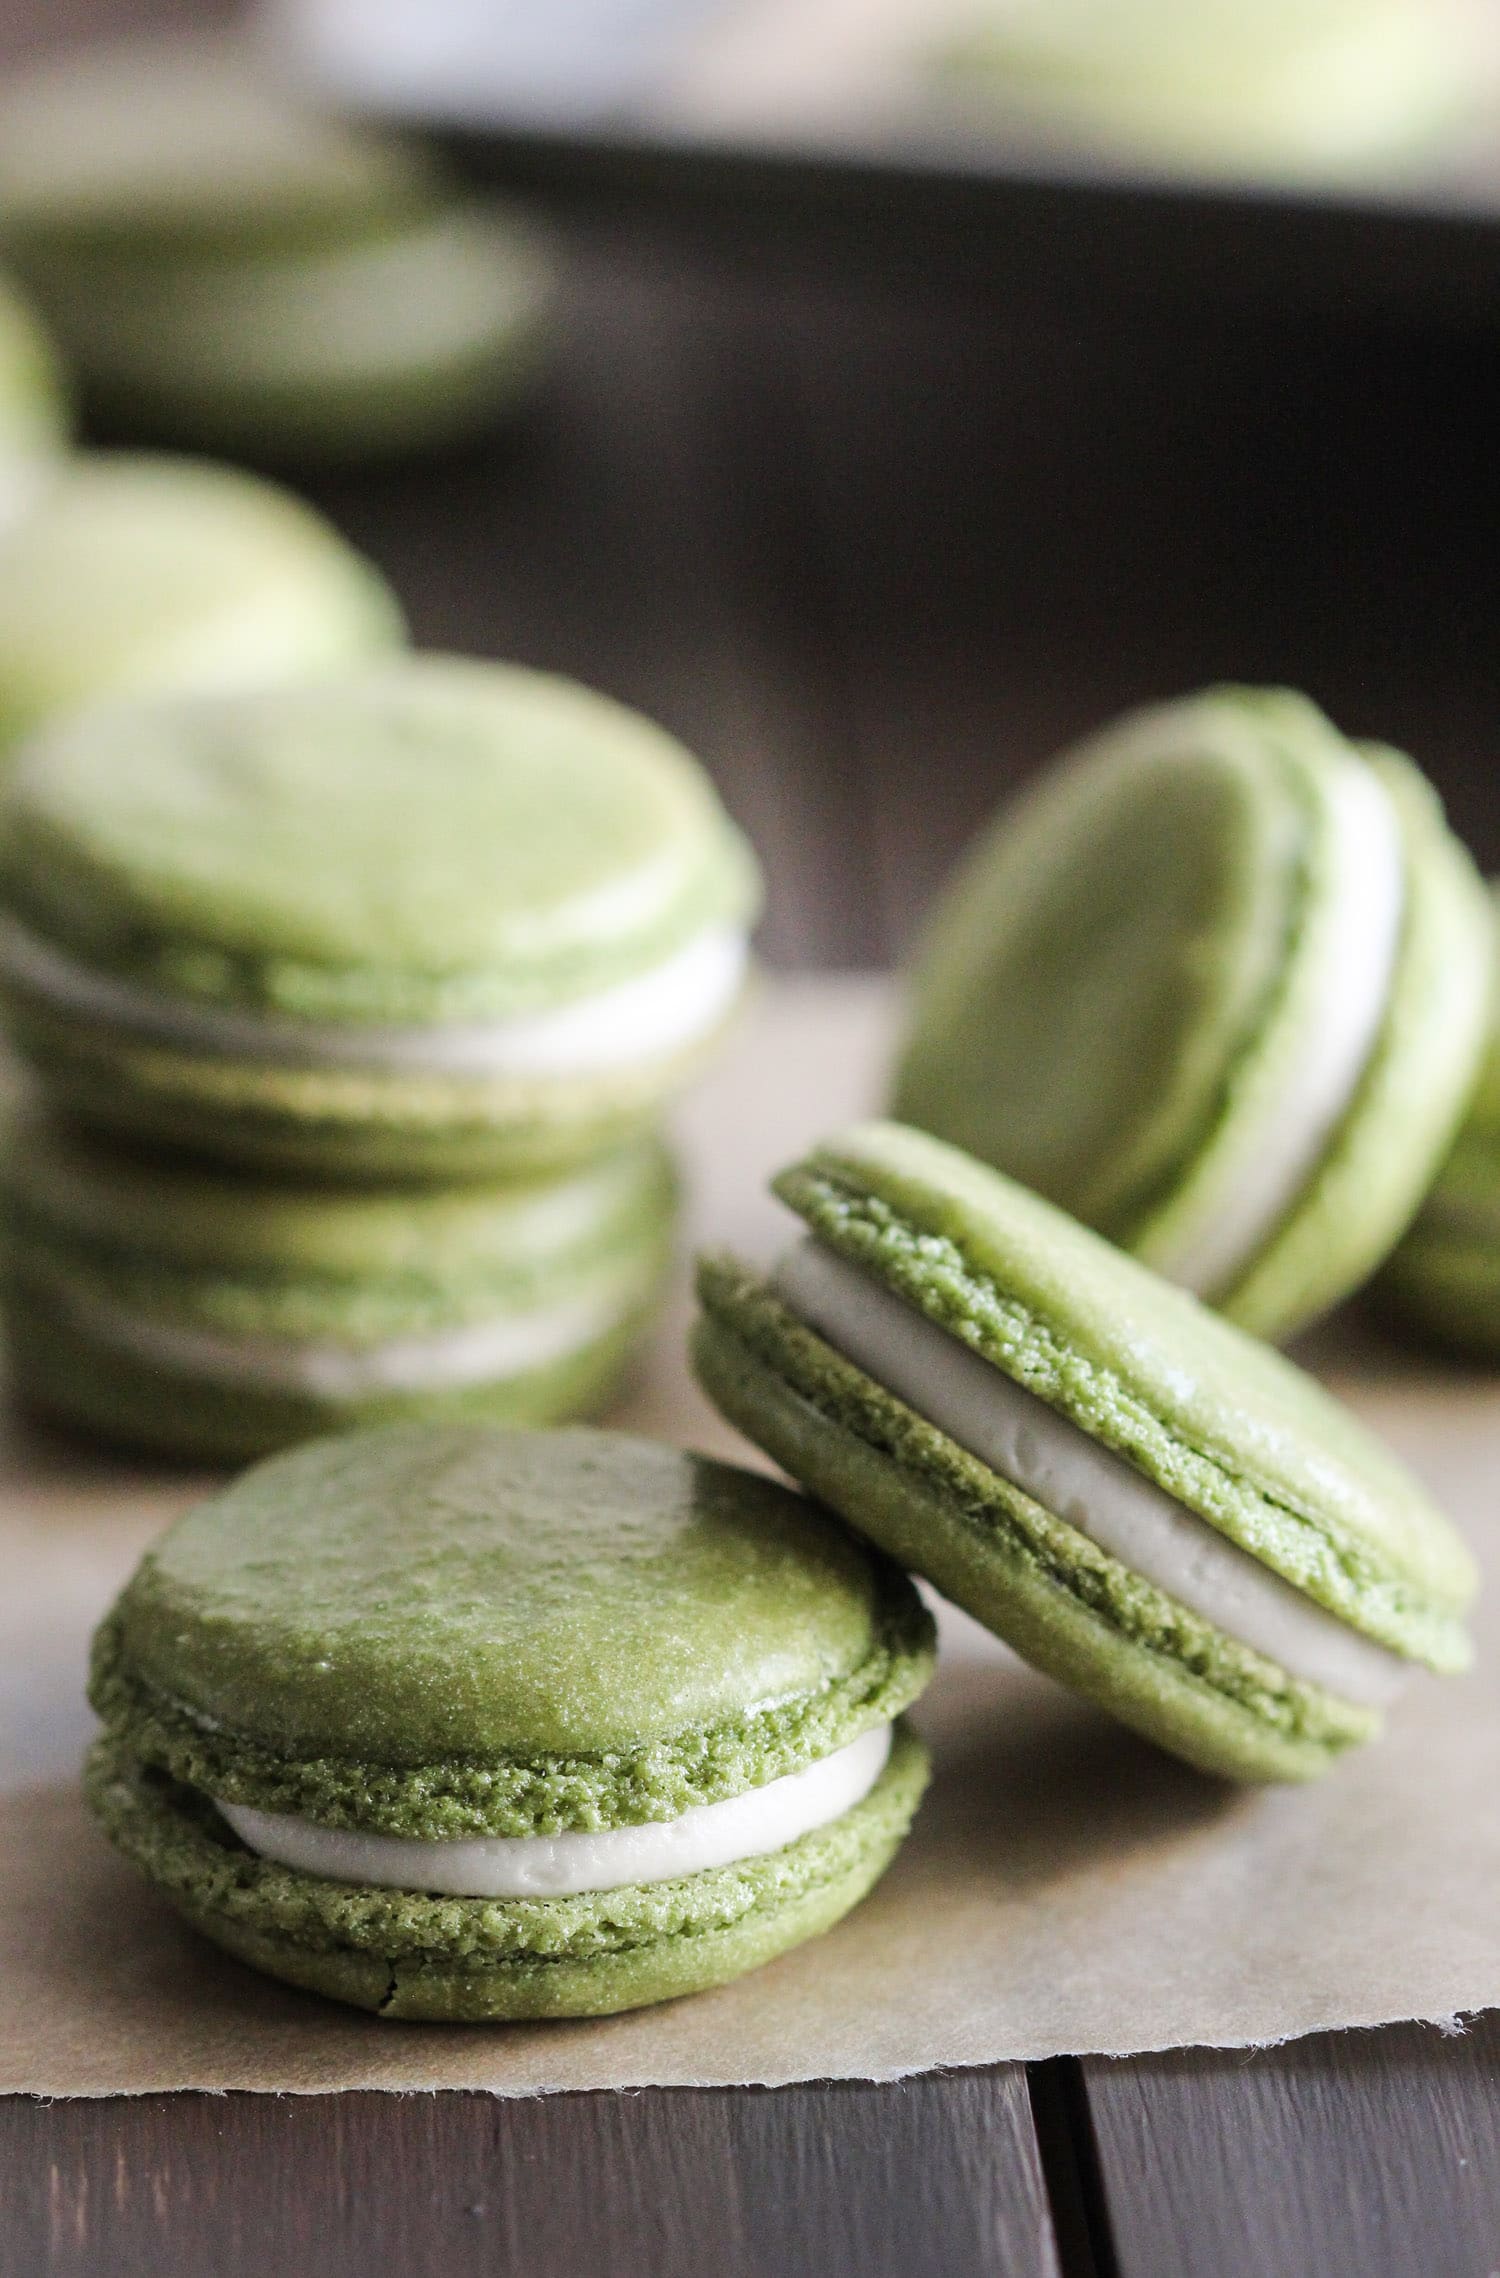 These Healthy Matcha Green Tea French Macarons aren't your typical macarons... these are made without the bleached white sugar, artificial flavorings, and artificial food dyes! That vibrant green you see is ALL NATURAL. These bite-sized treats are sweet, addicting, unique, and sophisticated. They're all natural, low fat, and gluten free too! Healthy Dessert Recipes at the Desserts With Benefits Blog